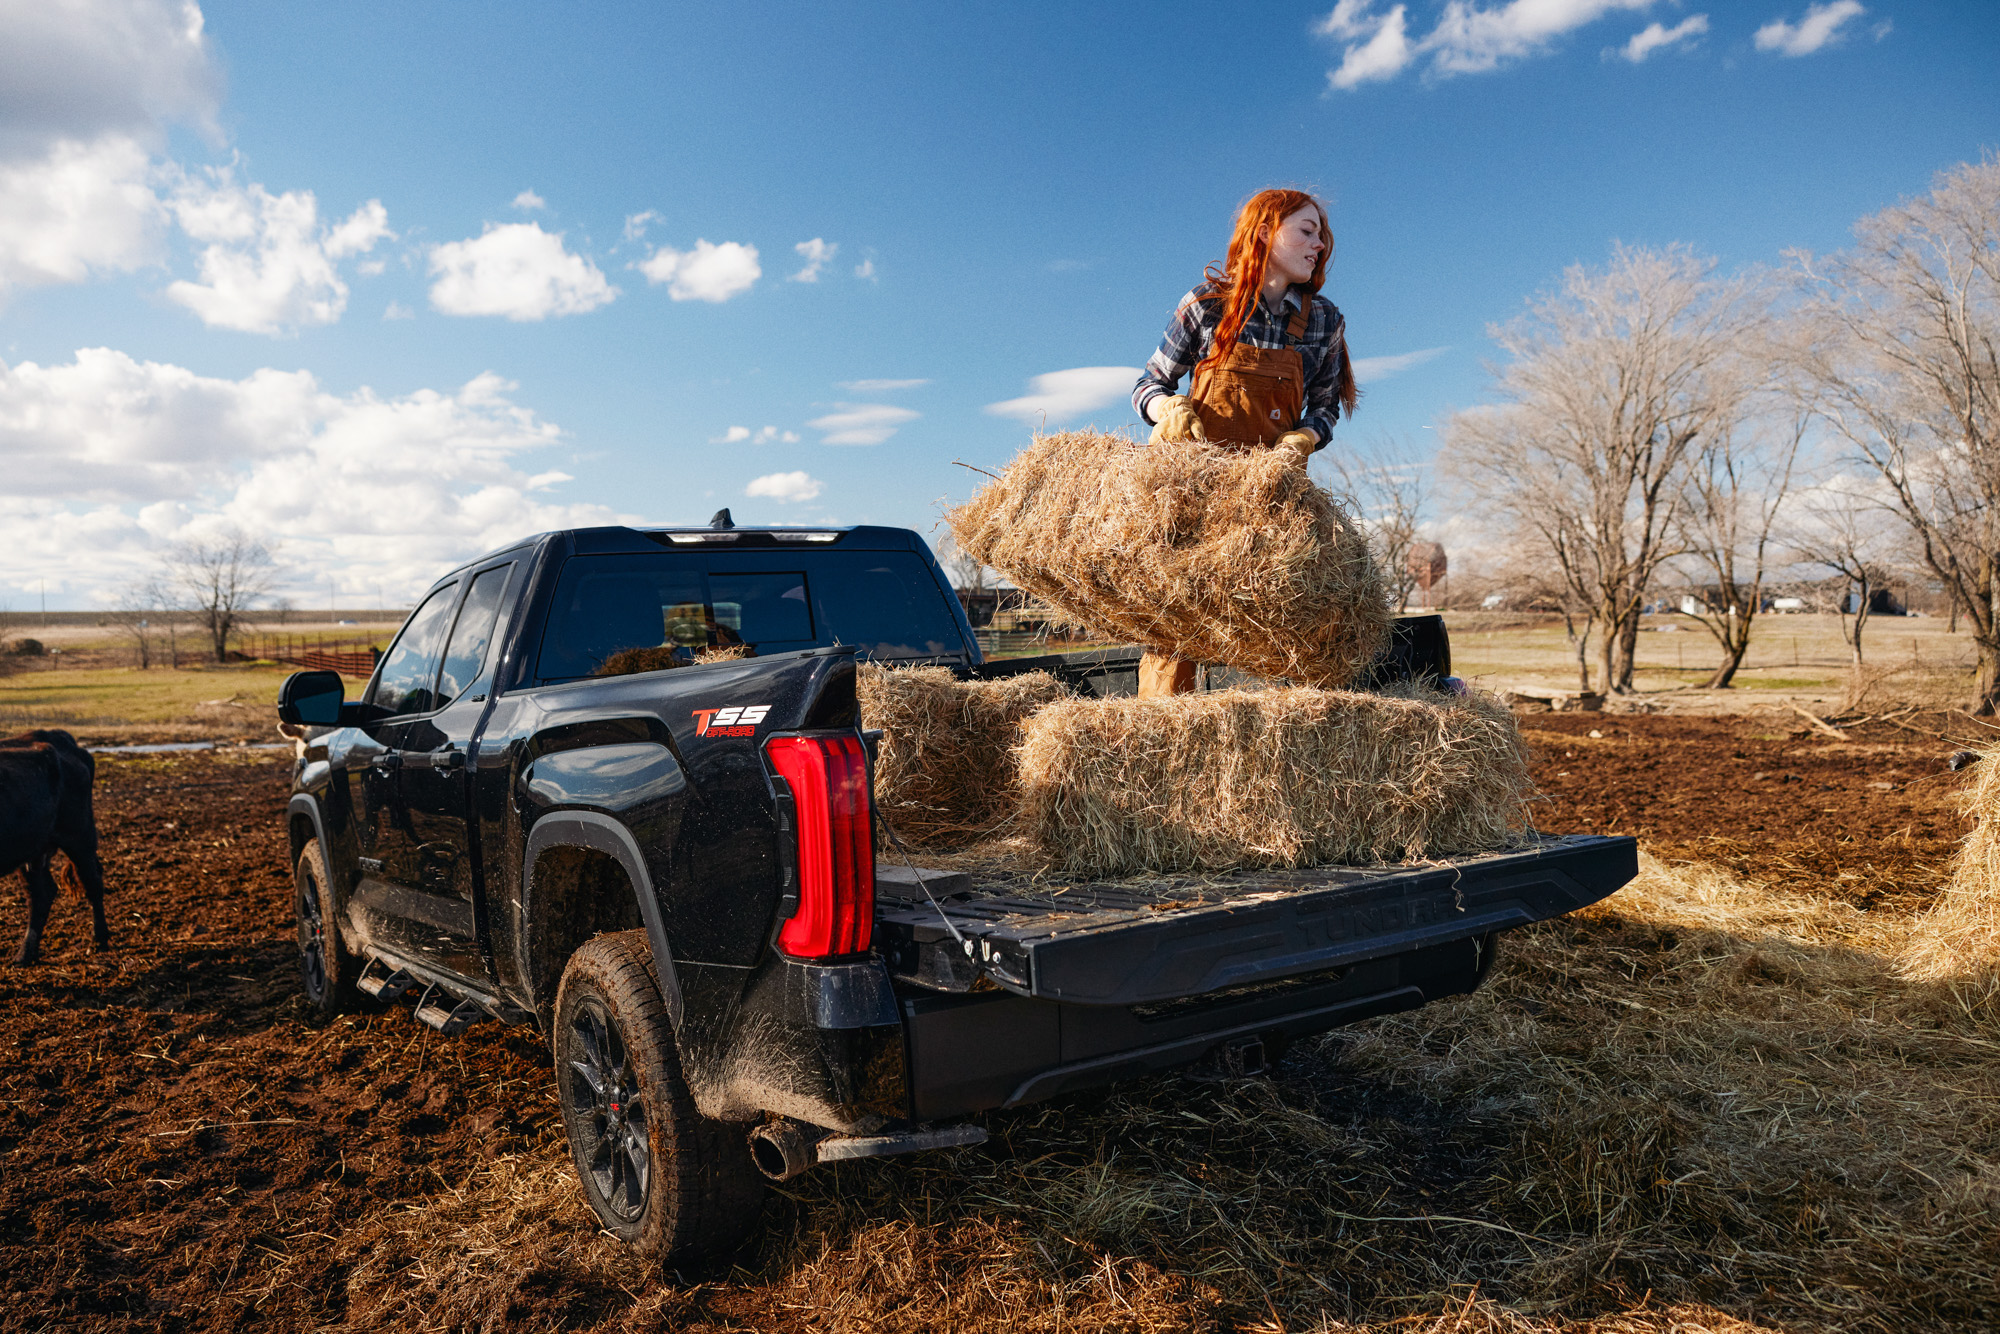 automotive and commercial photographer caleb kuhl photographs the toyota tundra truck as a part of farm life